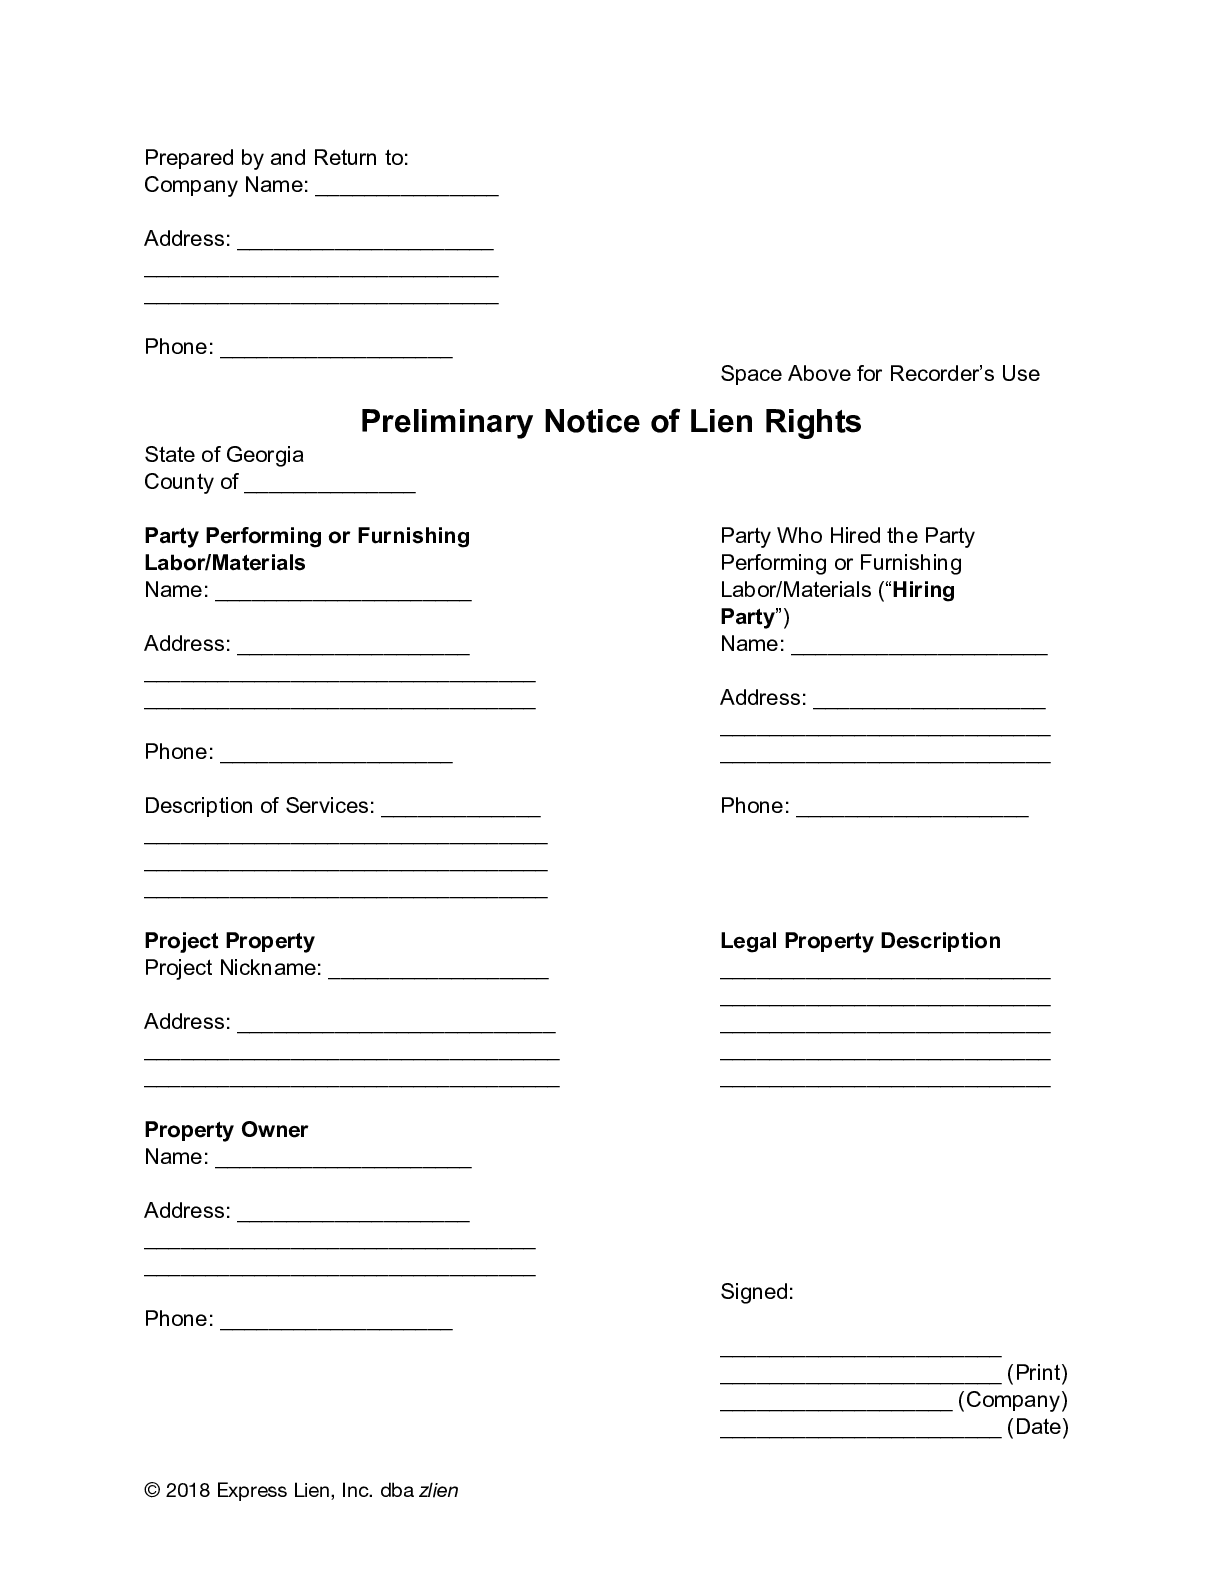 Georgia Preliminary Notice of Lien Rights Form - free from